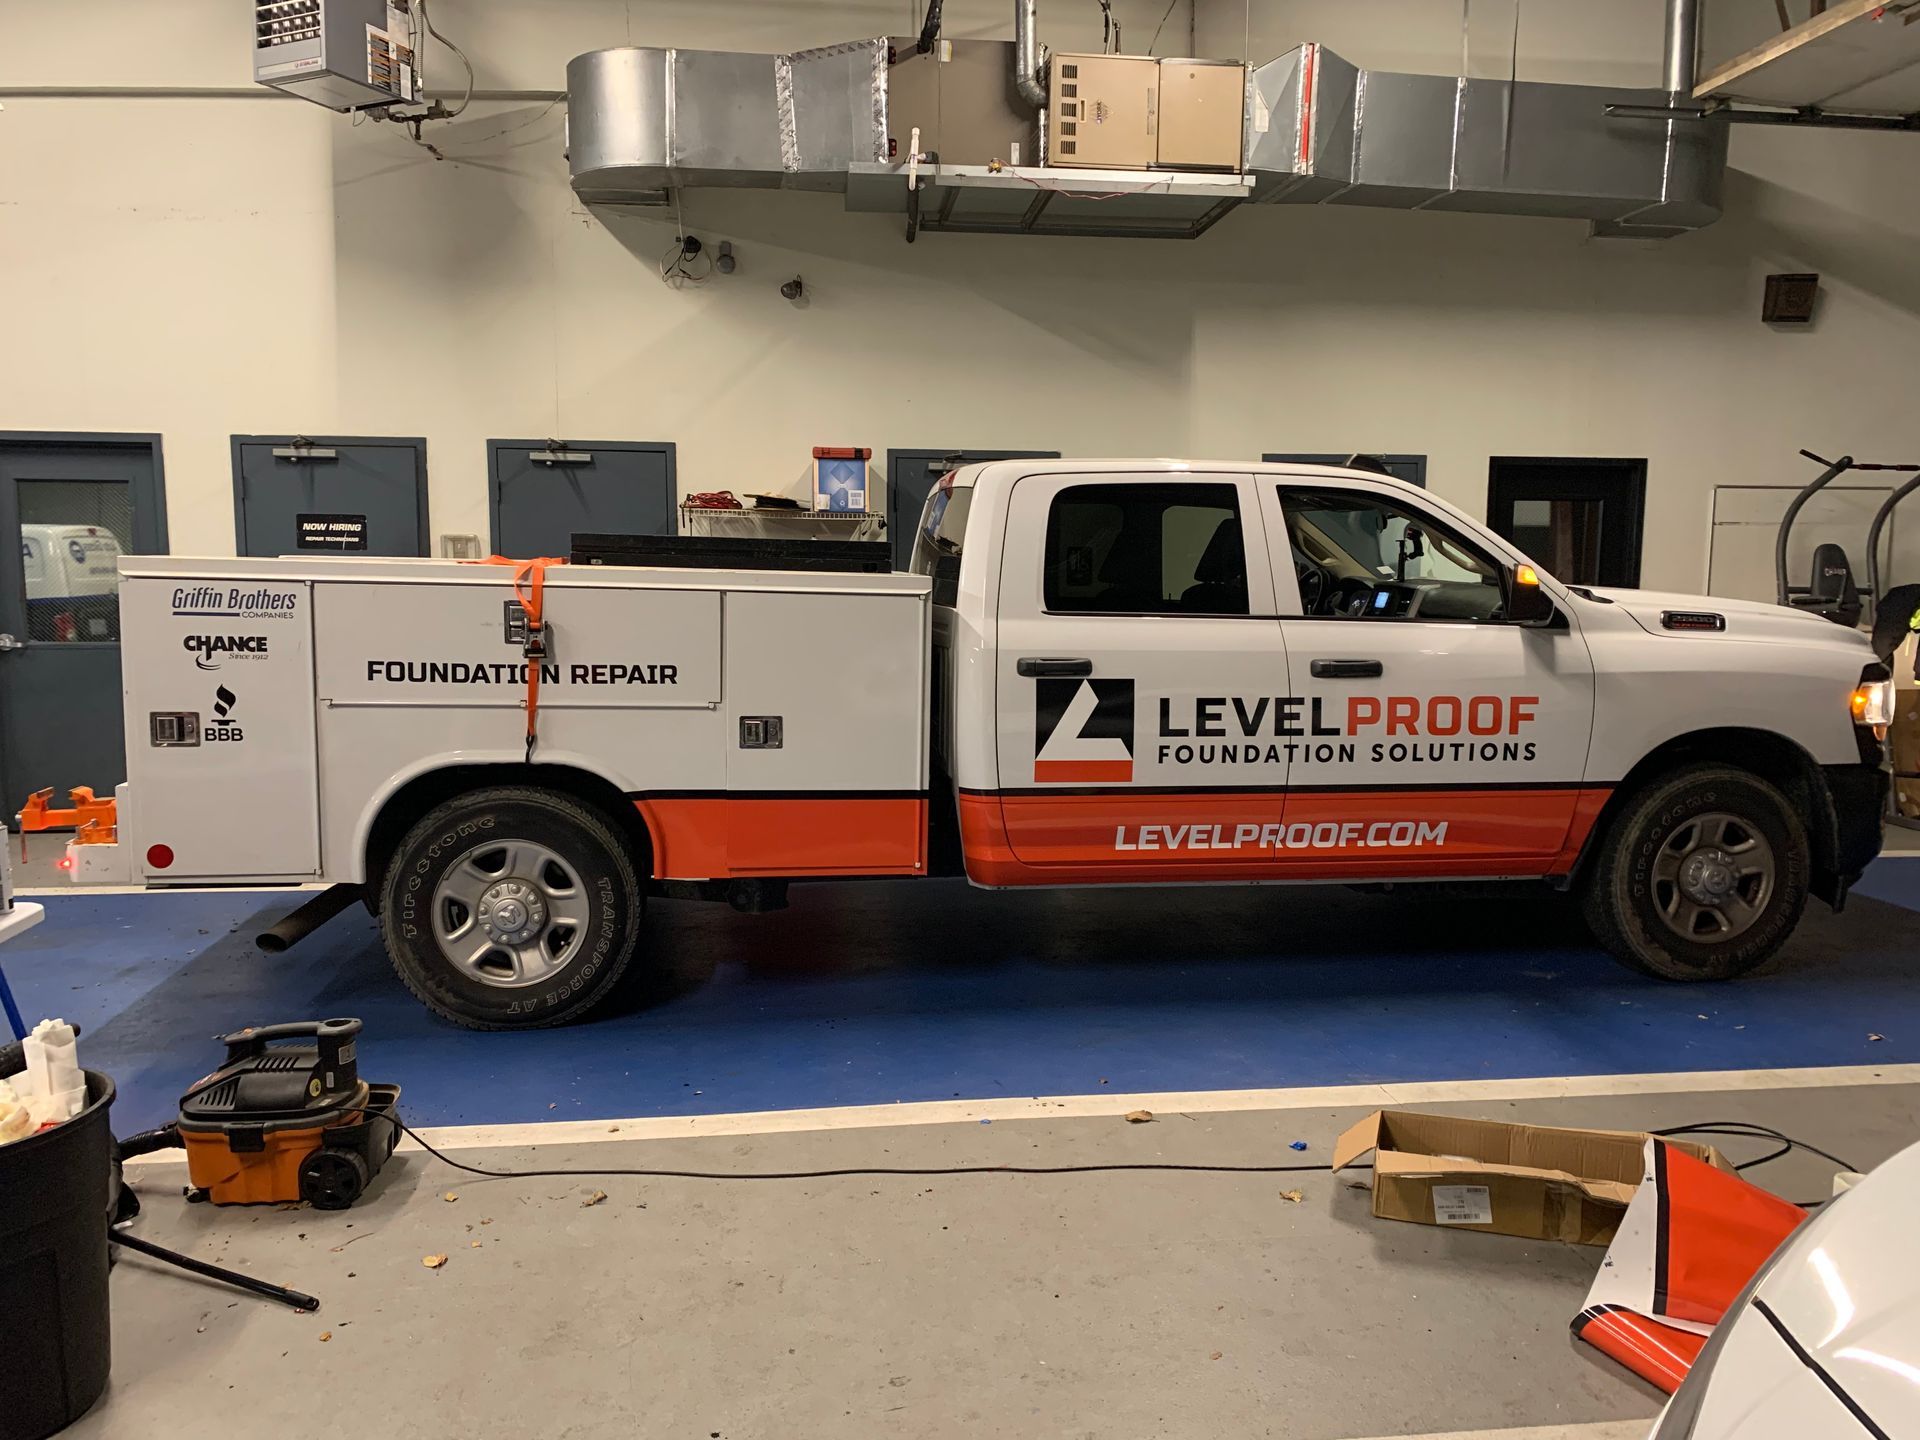 Partial Truck Wrap Installed in Charlotte, NC